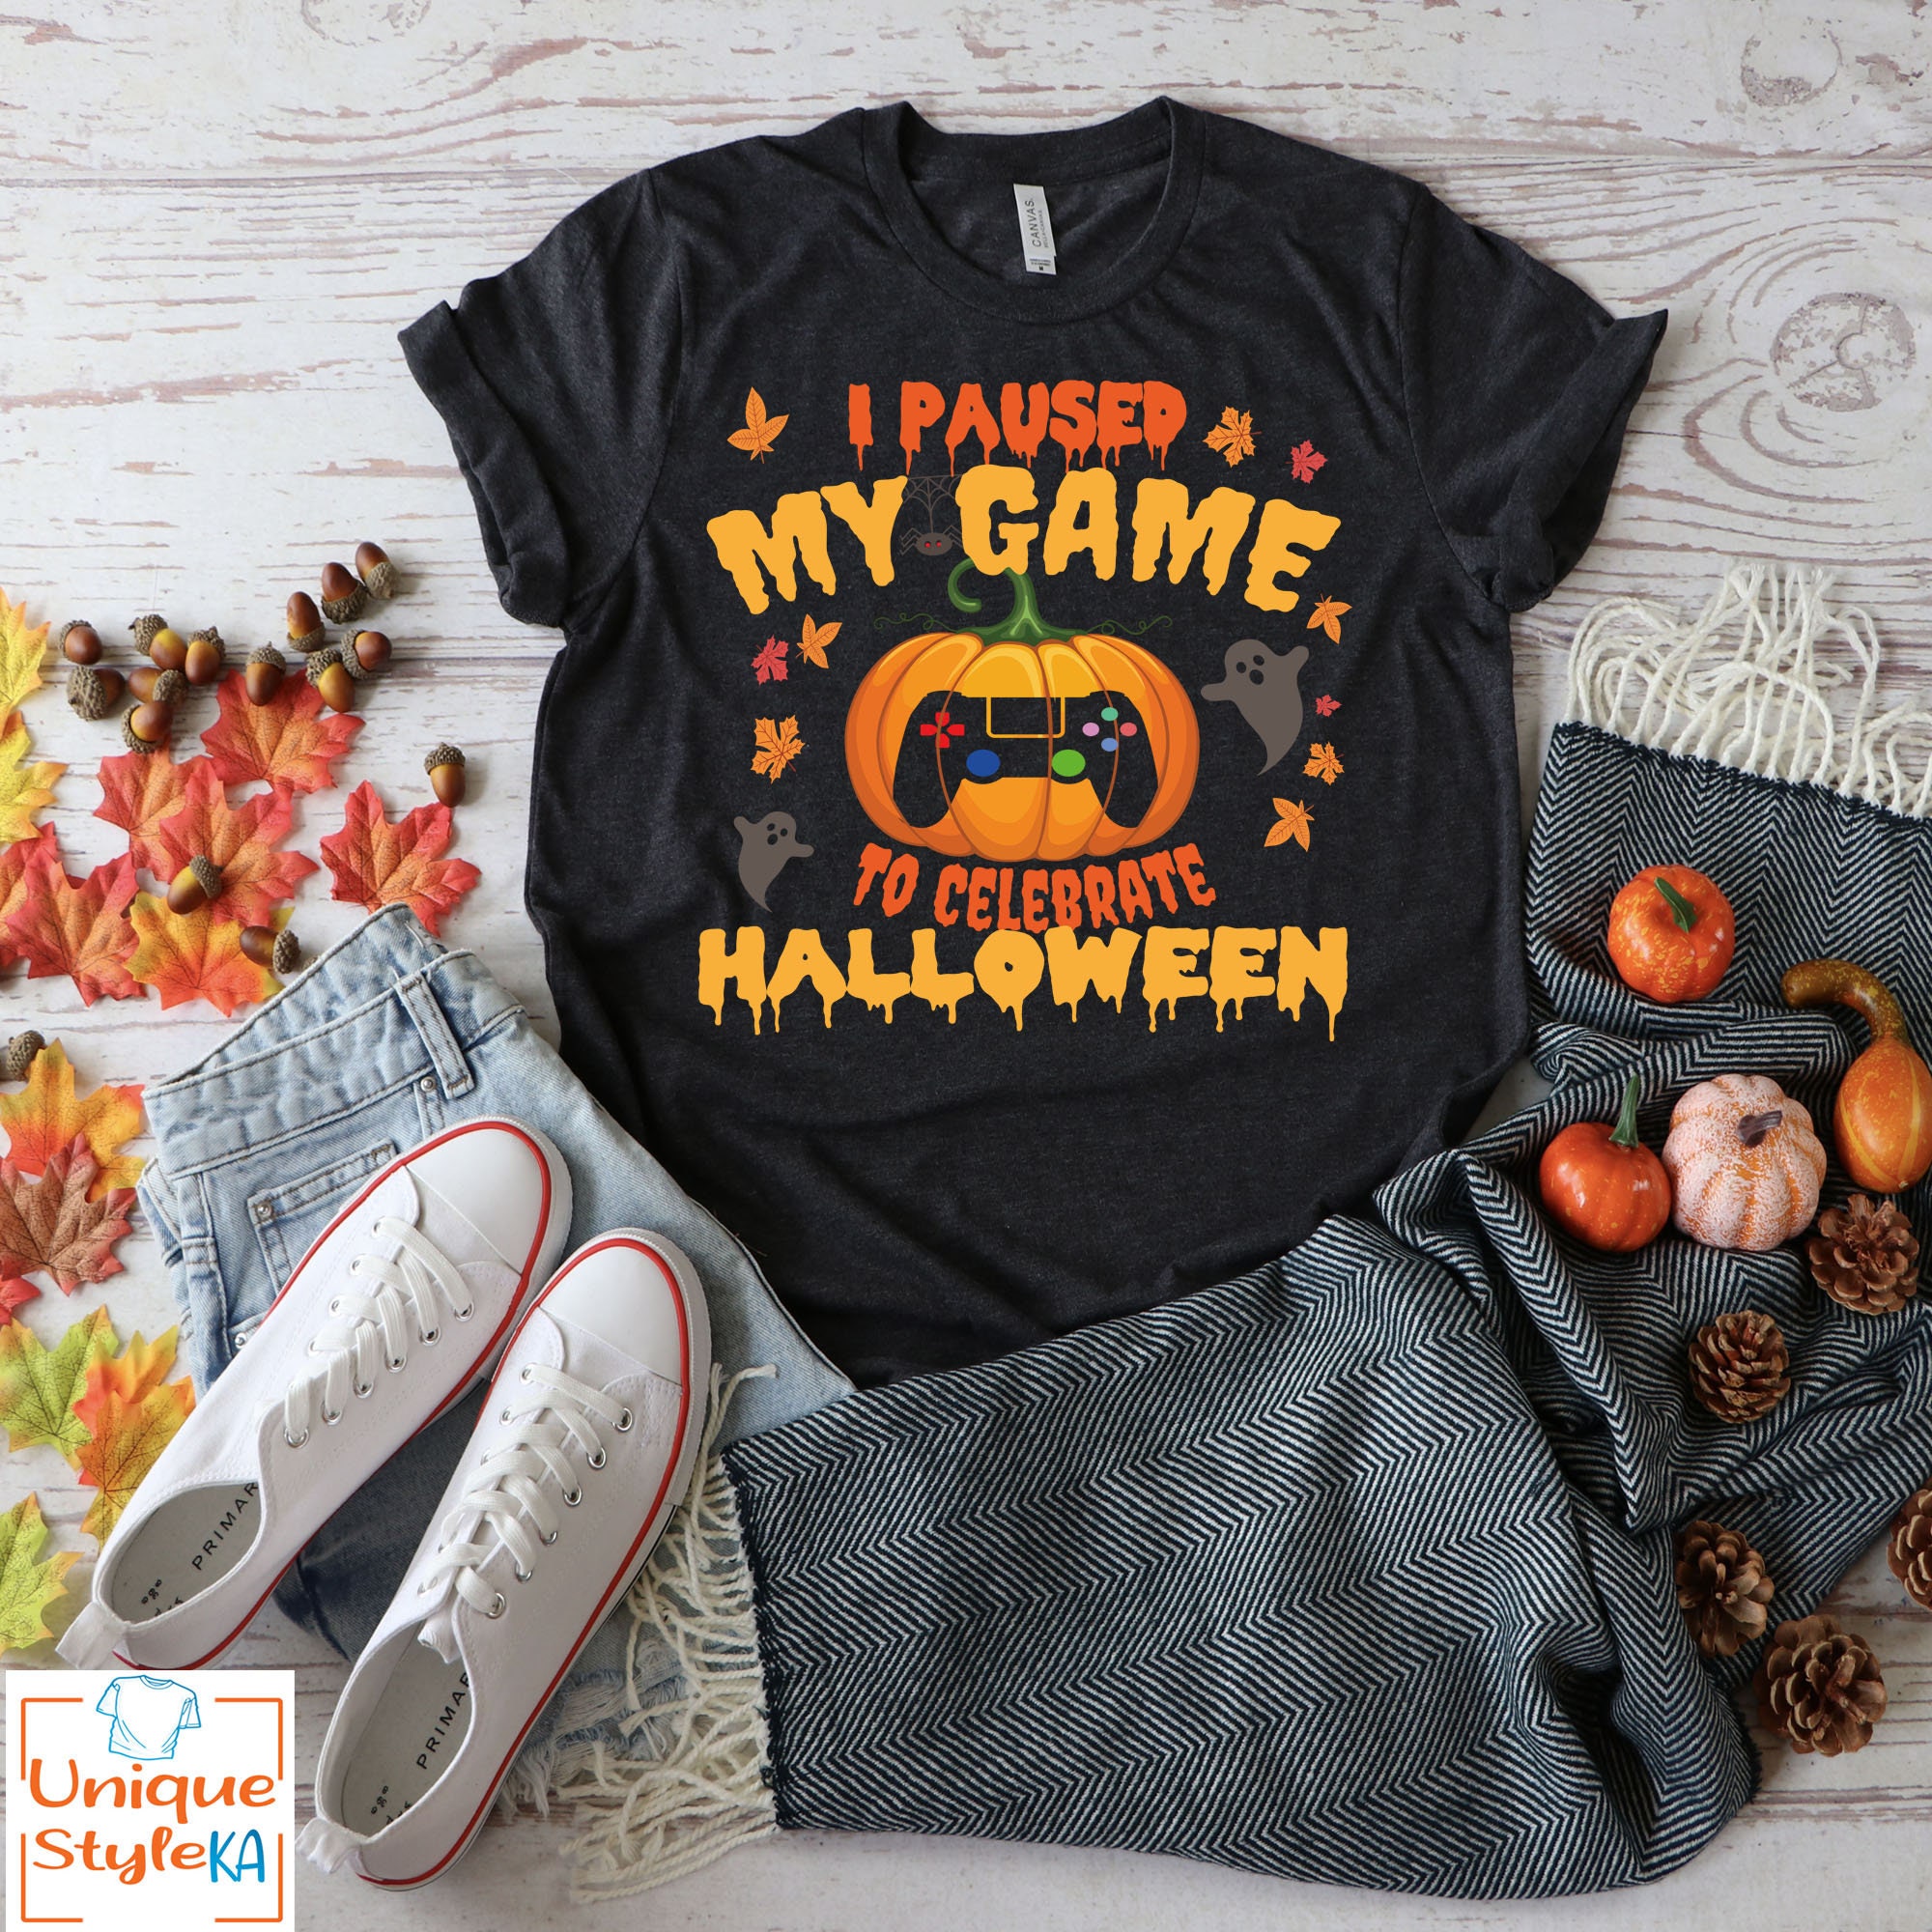 Discover I Paused My Game To Celebrate Halloween, Video Games Lover Gift, Halloween Shirt, Halloween Gamer, Funny Halloween Video Gamer Design Gift